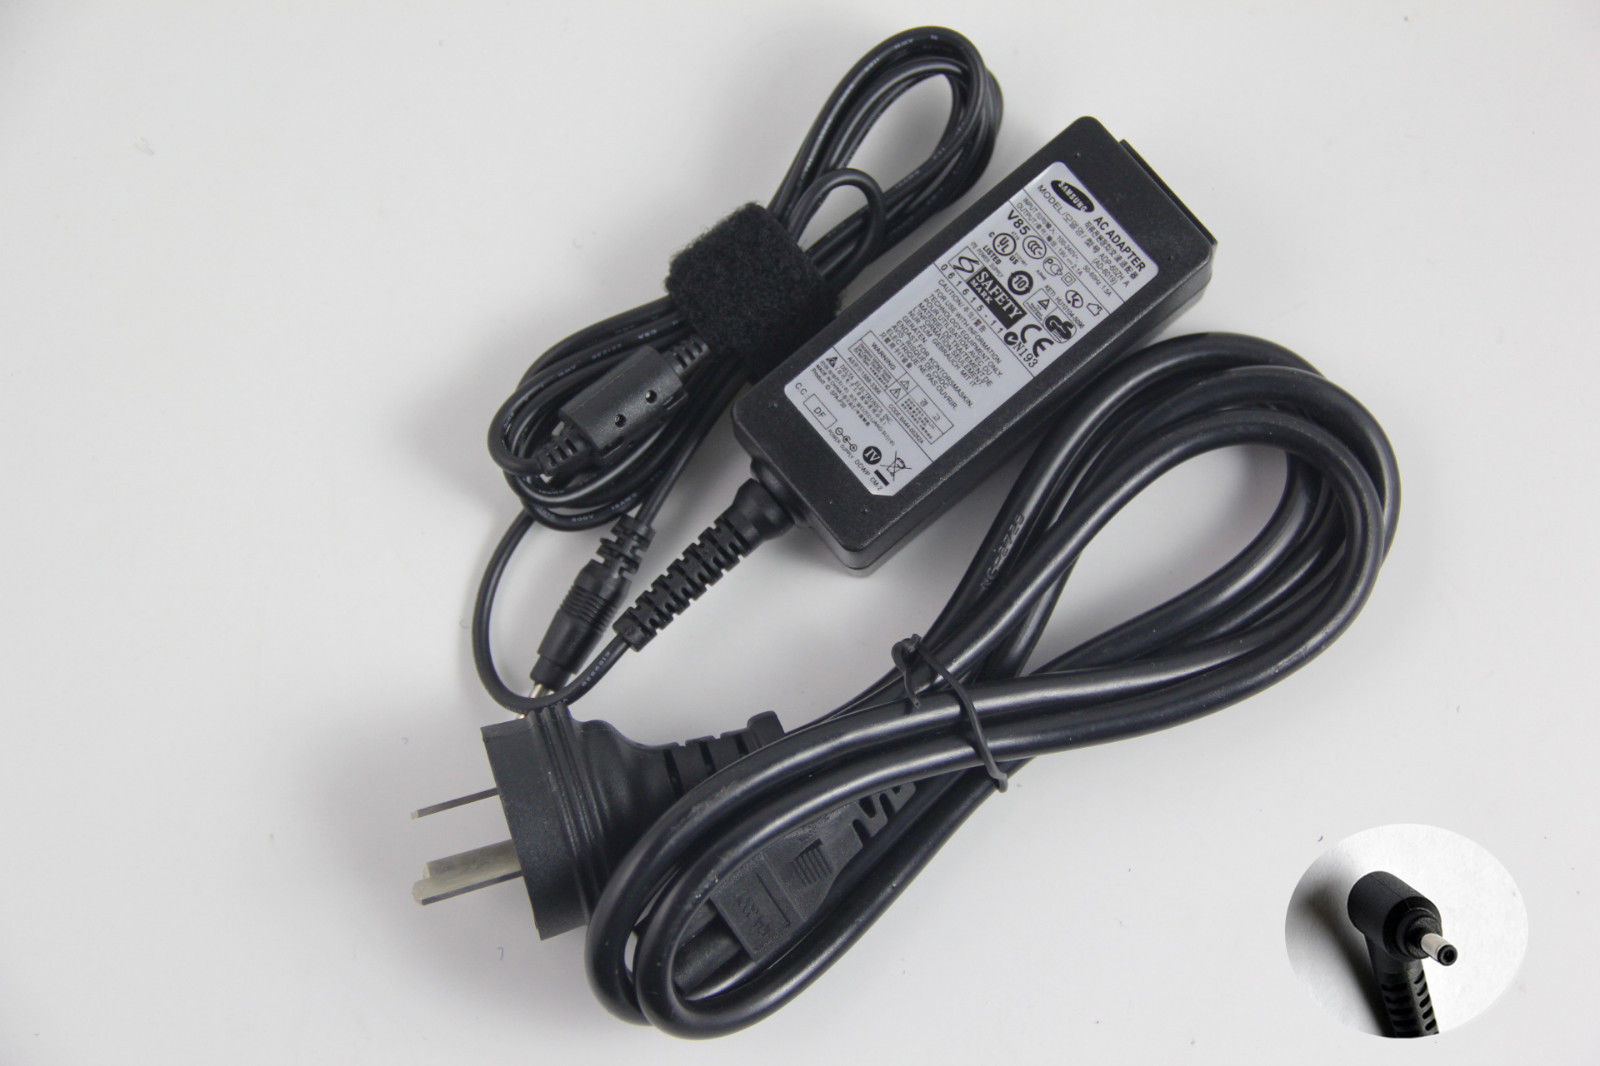 Genuine 40W Power Supply AC Charger Adapter For Samsung AD-4019S, AD-4019SL, PA-1400-14,AA-PA2N40S,AD-4019W, AA-PA2N40L, BA44-00278A, AA-PA3NS40/US,BA44-00279A, PA-1400-14, PA-1400-24